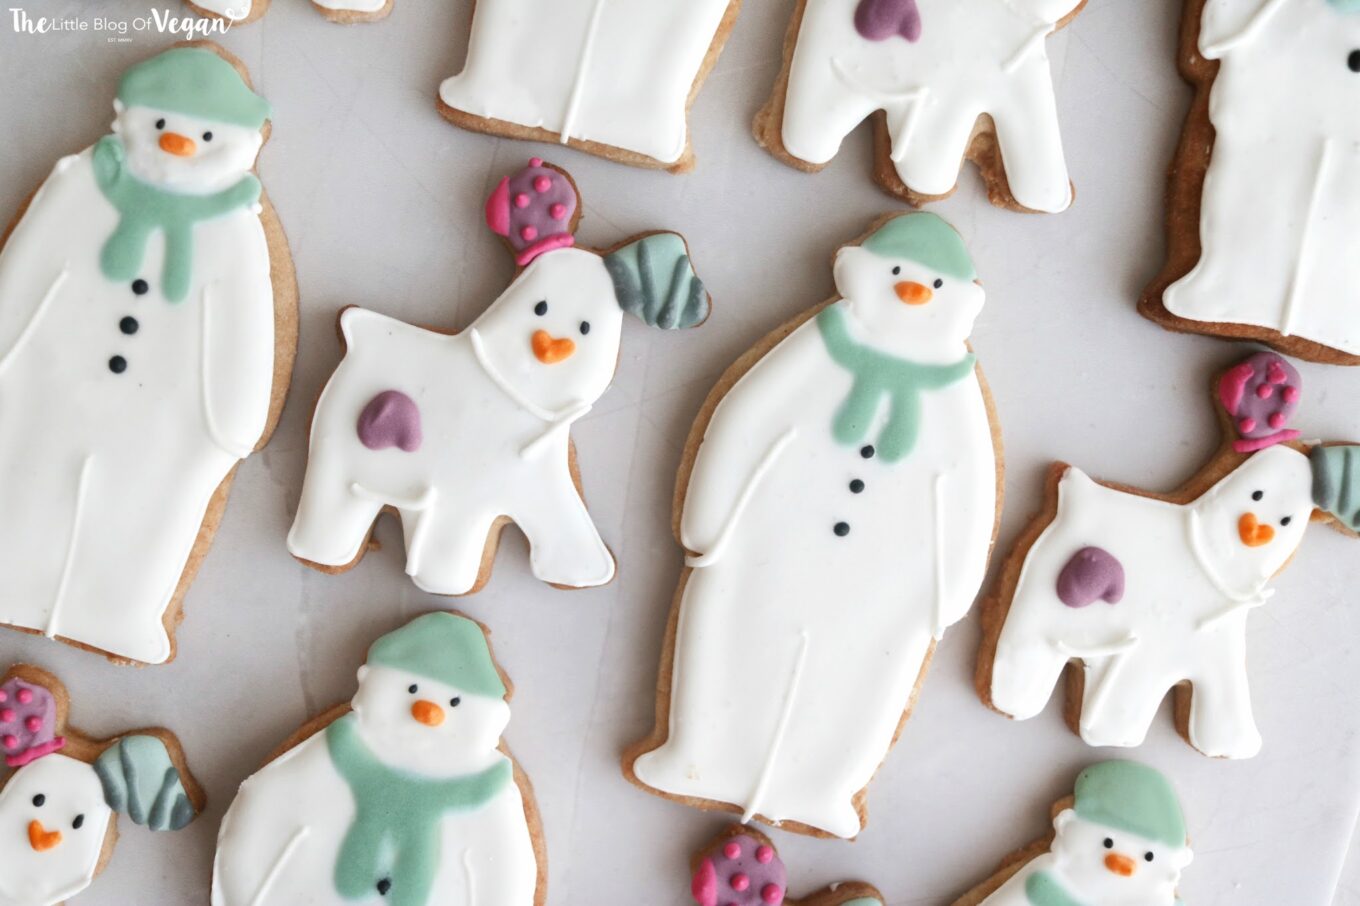 White and pastel-coloured cookies in the shape of a snowman and dogs.